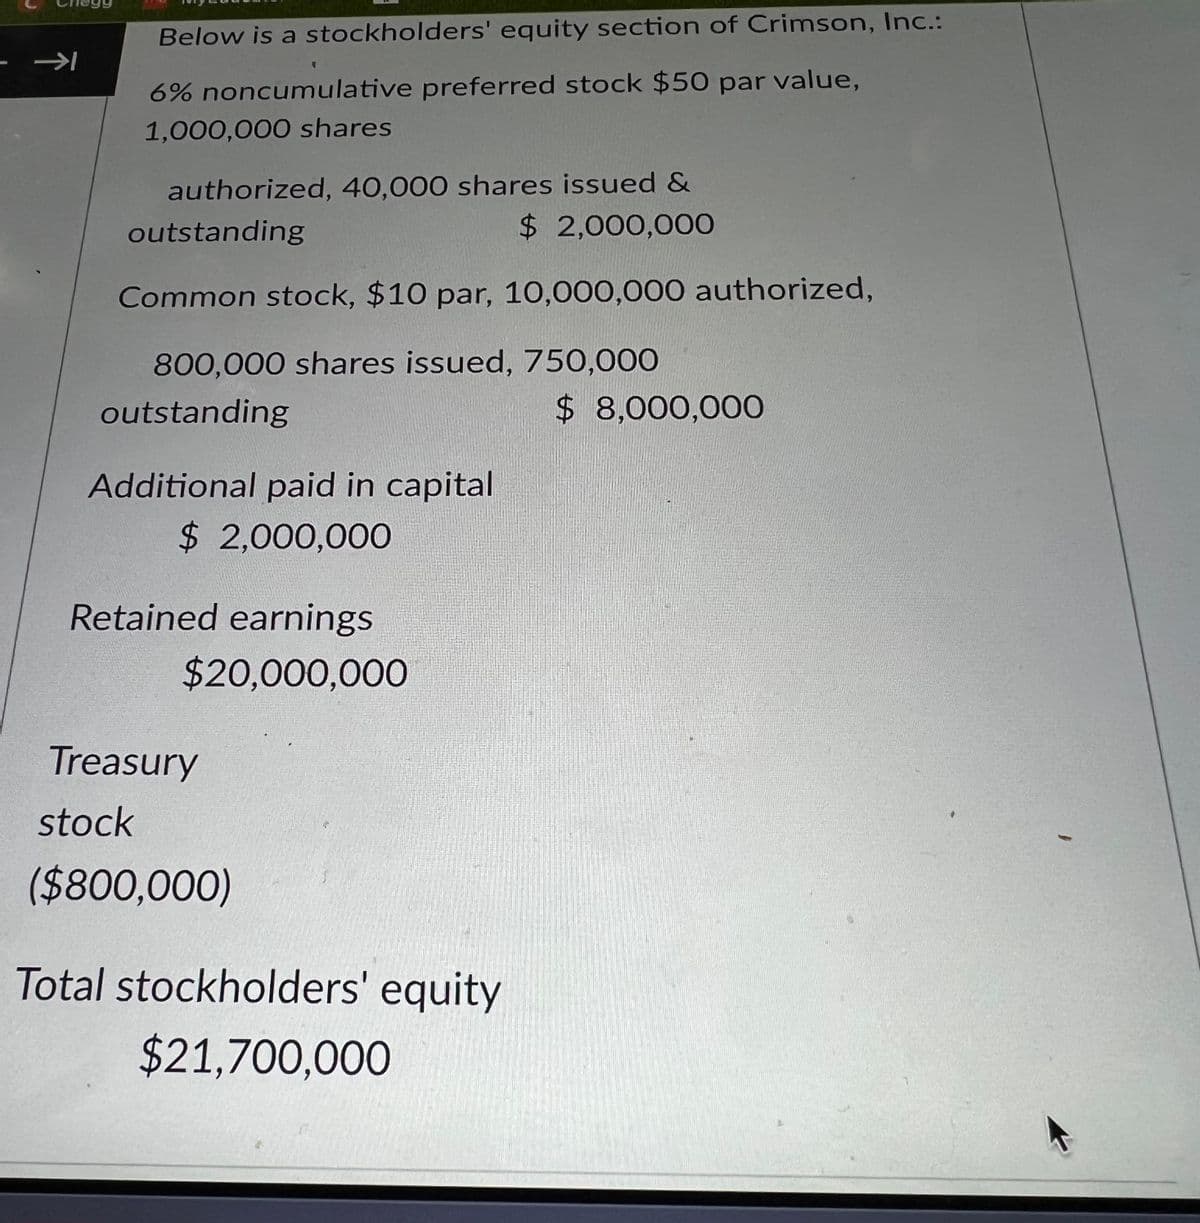 →
Below is a stockholders' equity section of Crimson, Inc.:
6% noncumulative preferred stock $50 par value,
1,000,000 shares
authorized, 40,000 shares issued &
outstanding
$2,000,000
Common stock, $10 par, 10,000,000 authorized,
800,000 shares issued, 750,000
outstanding
Additional paid in capital
$ 2,000,000
Retained earnings
$20,000,000
Treasury
stock
($800,000)
Total stockholders' equity
$21,700,000
$8,000,000